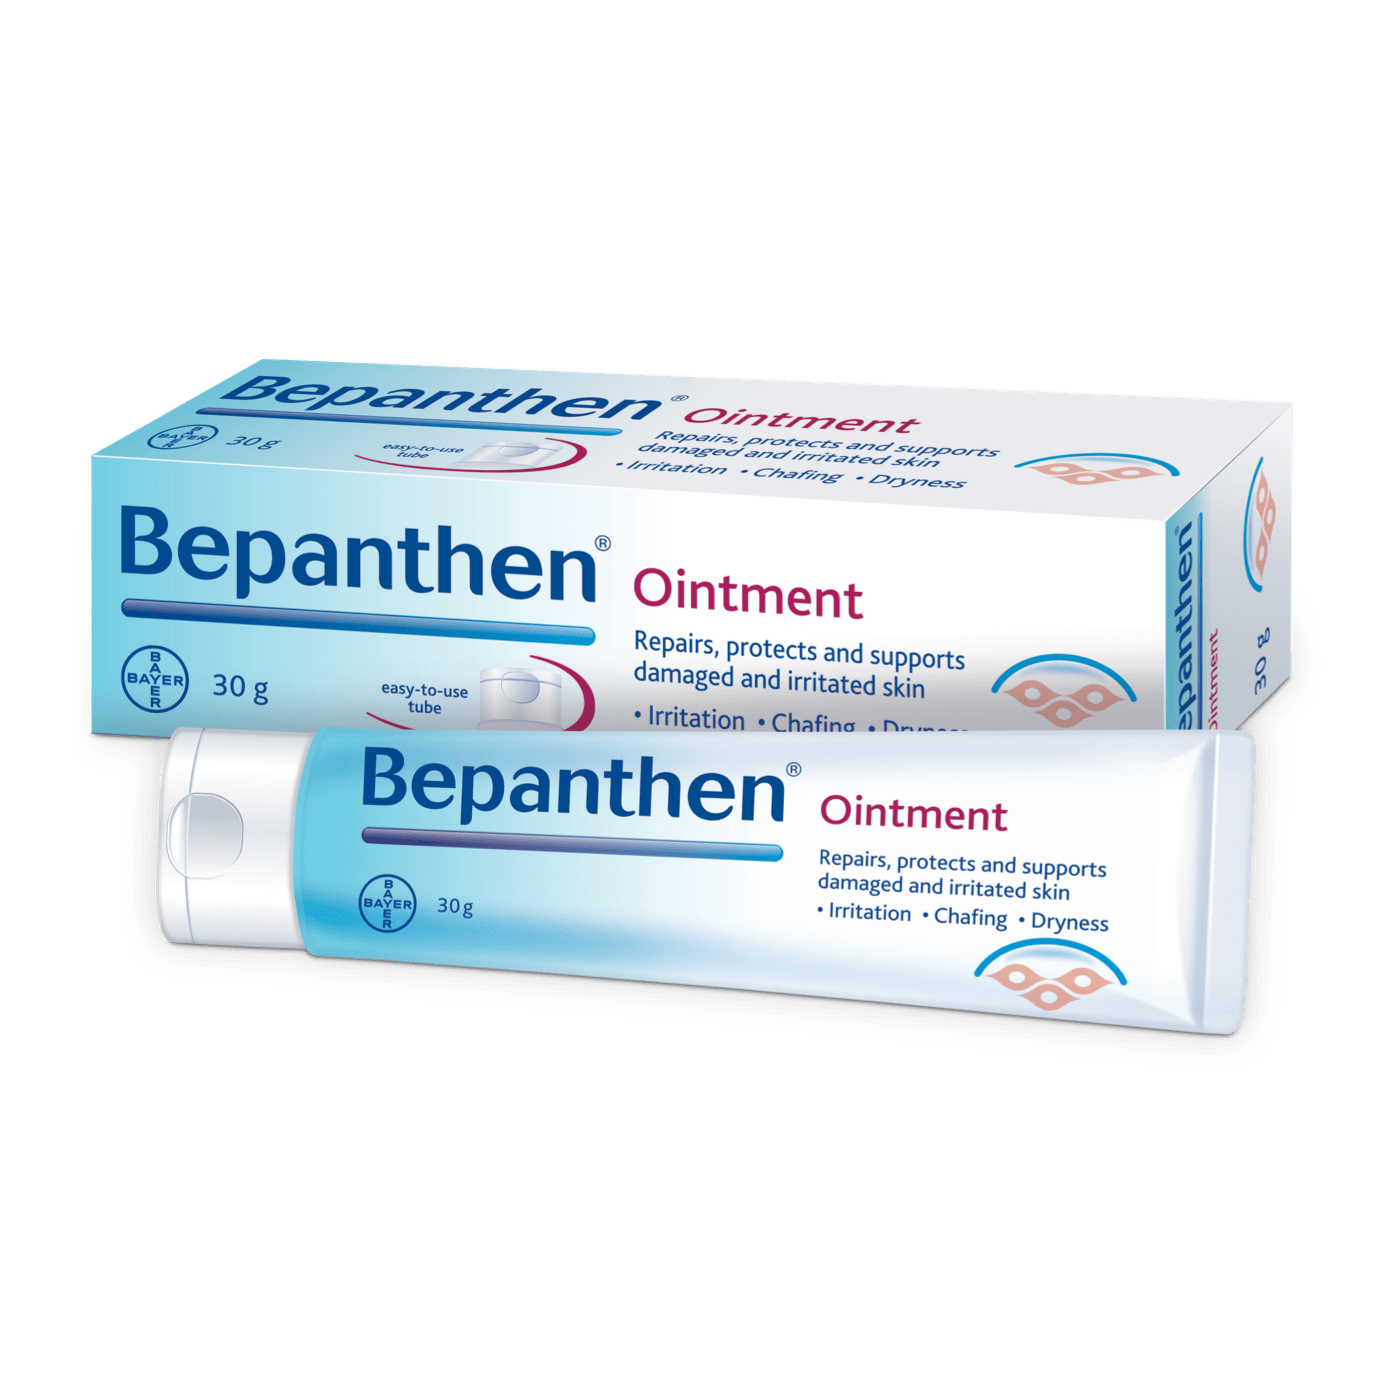 Bepanthen® Ointment